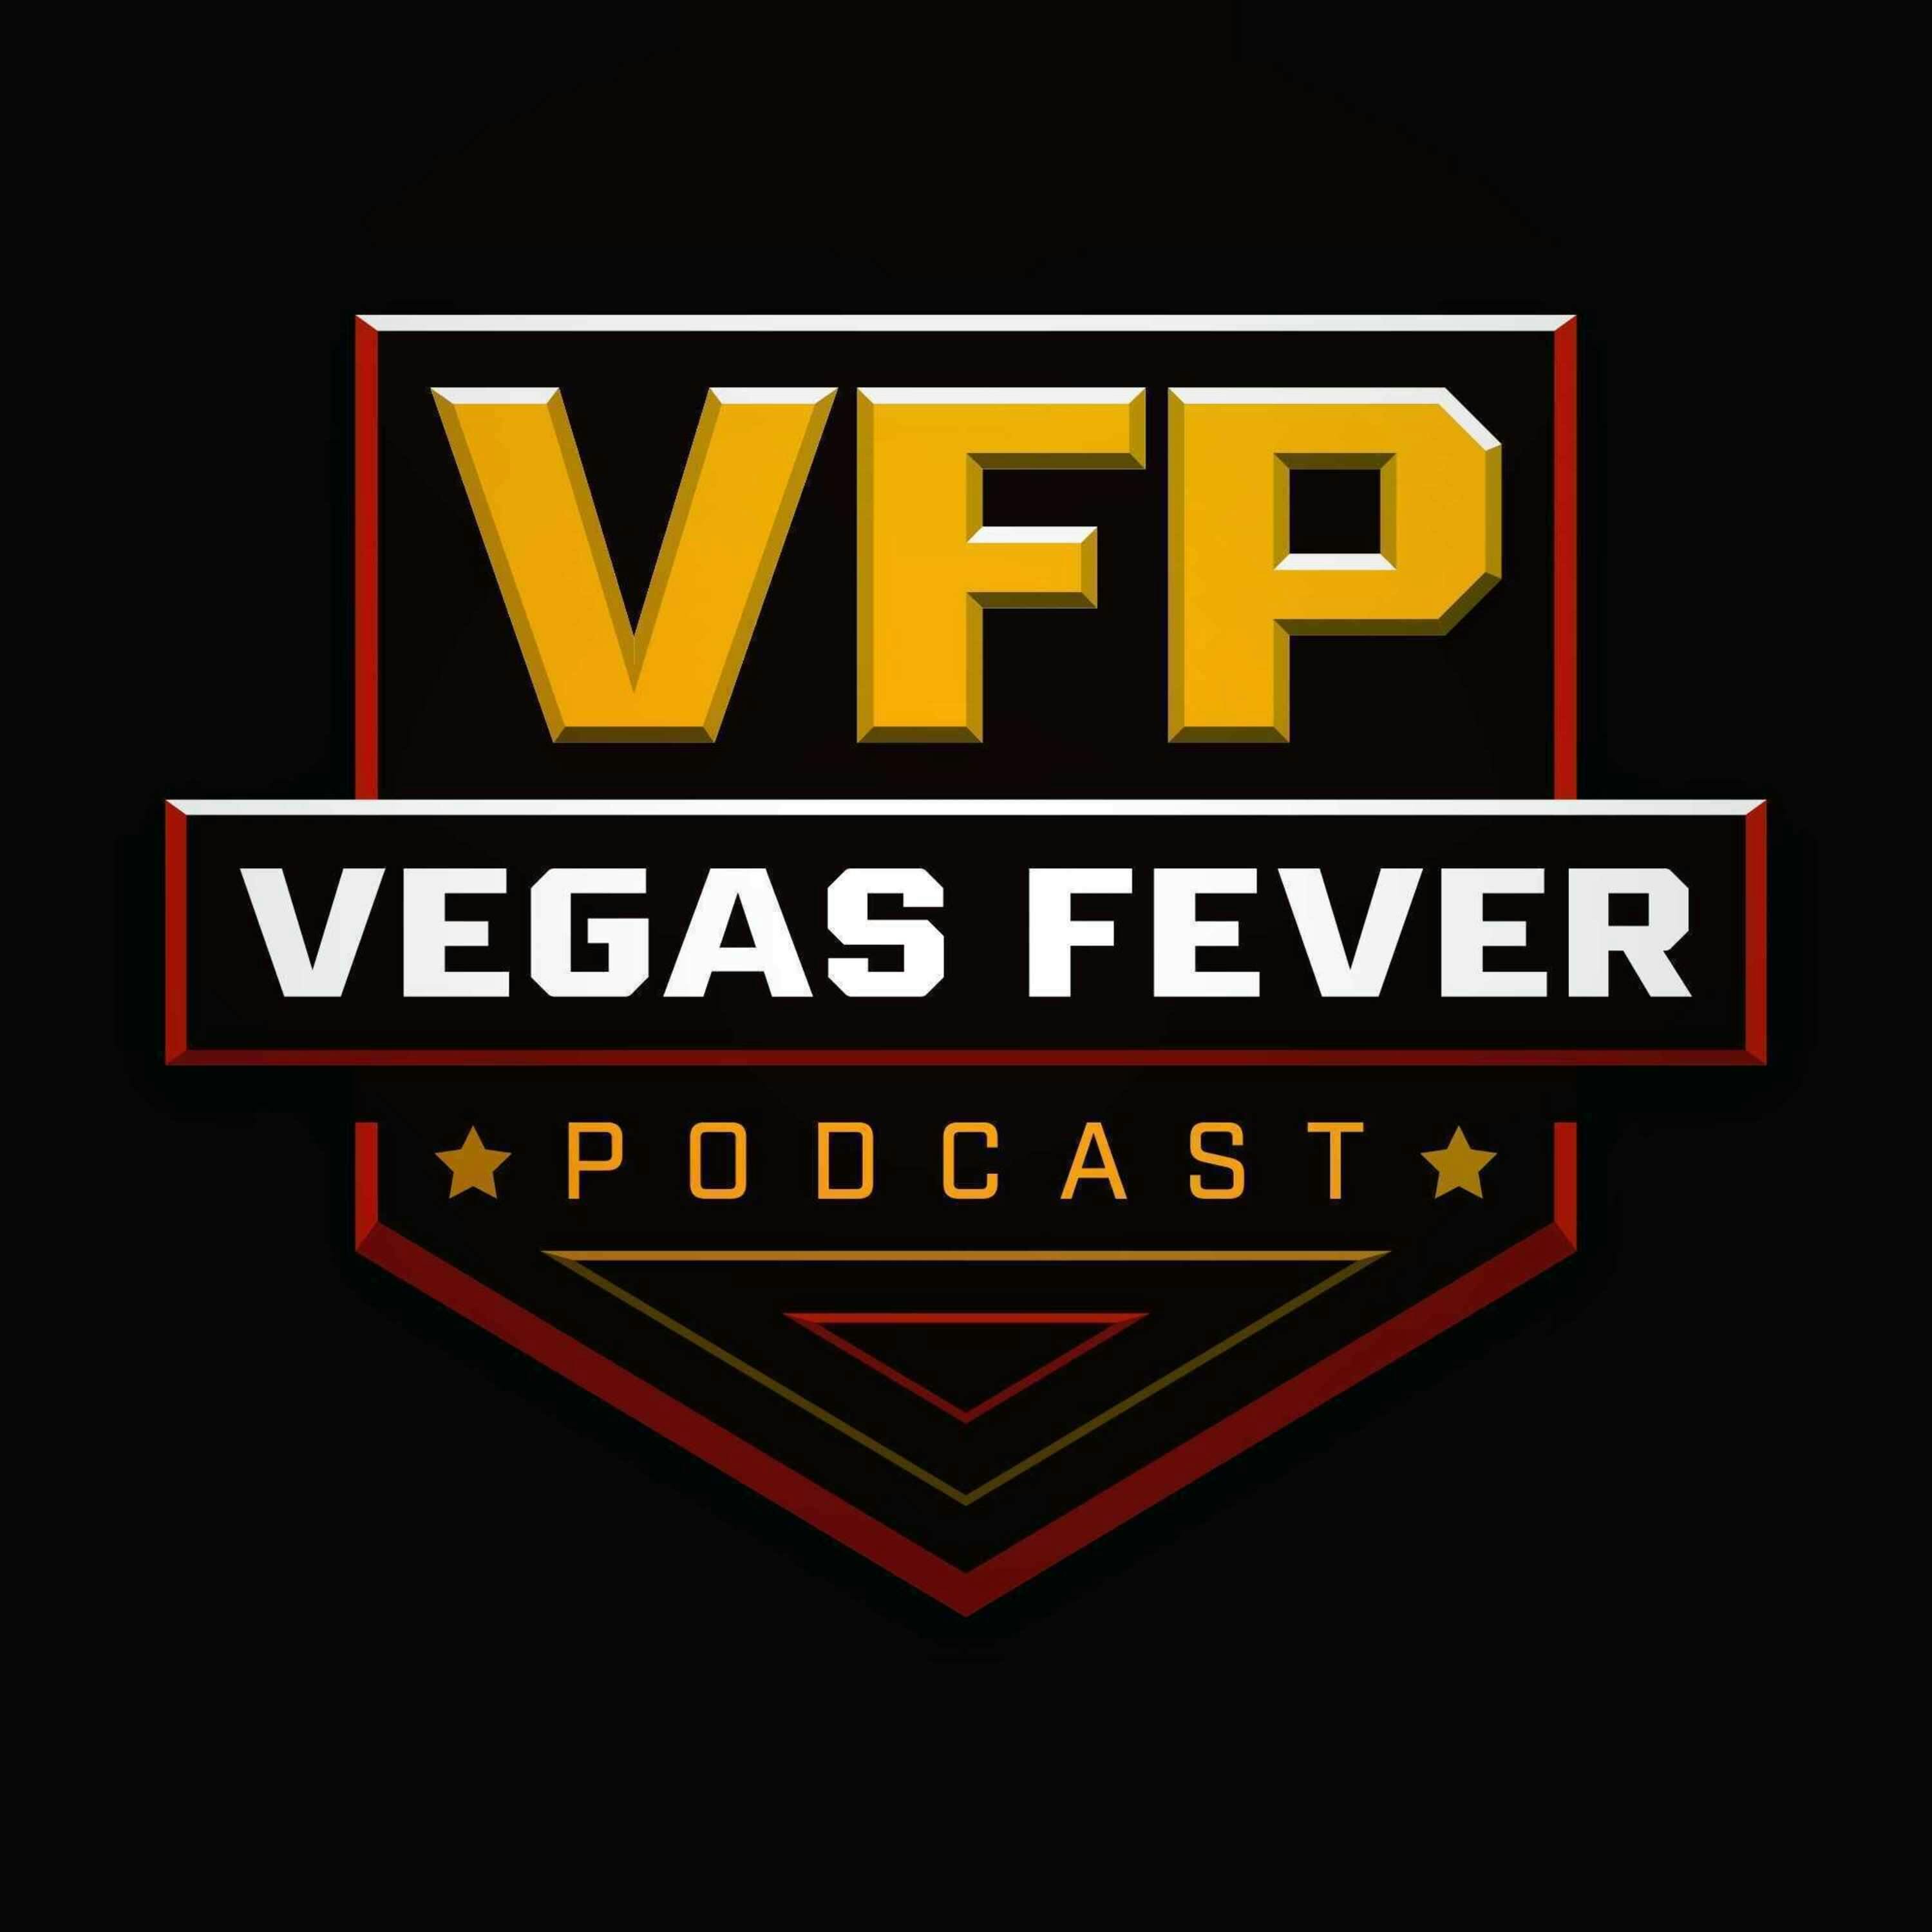 We discuss who laid the foundation in Vegas’ sports history & how the VGK did during reunion week.